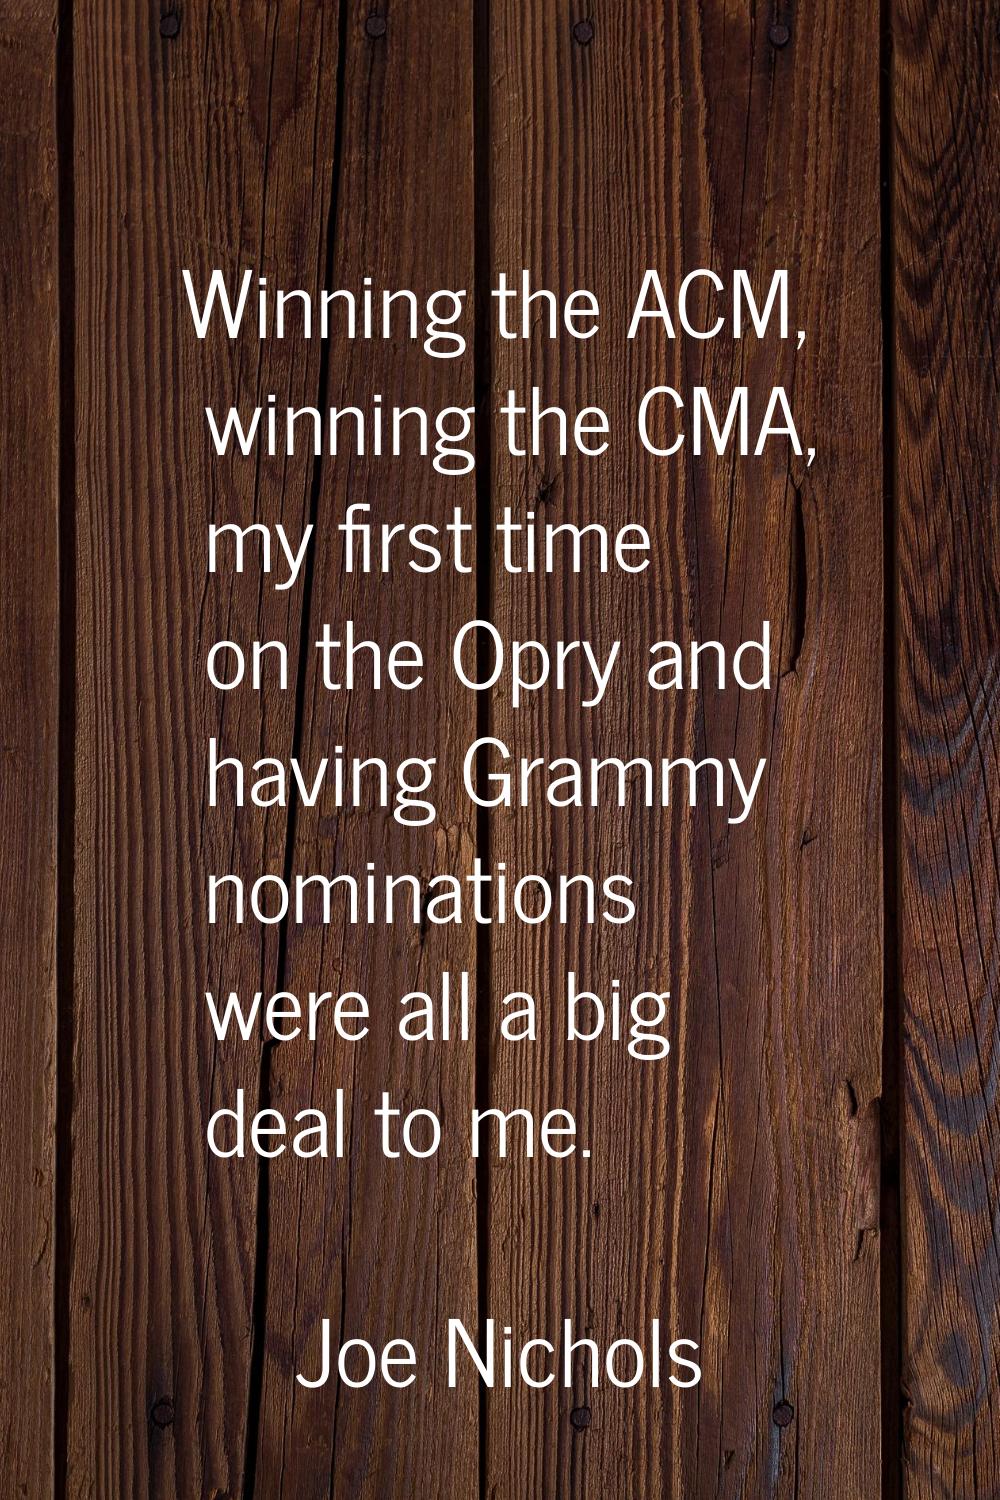 Winning the ACM, winning the CMA, my first time on the Opry and having Grammy nominations were all 